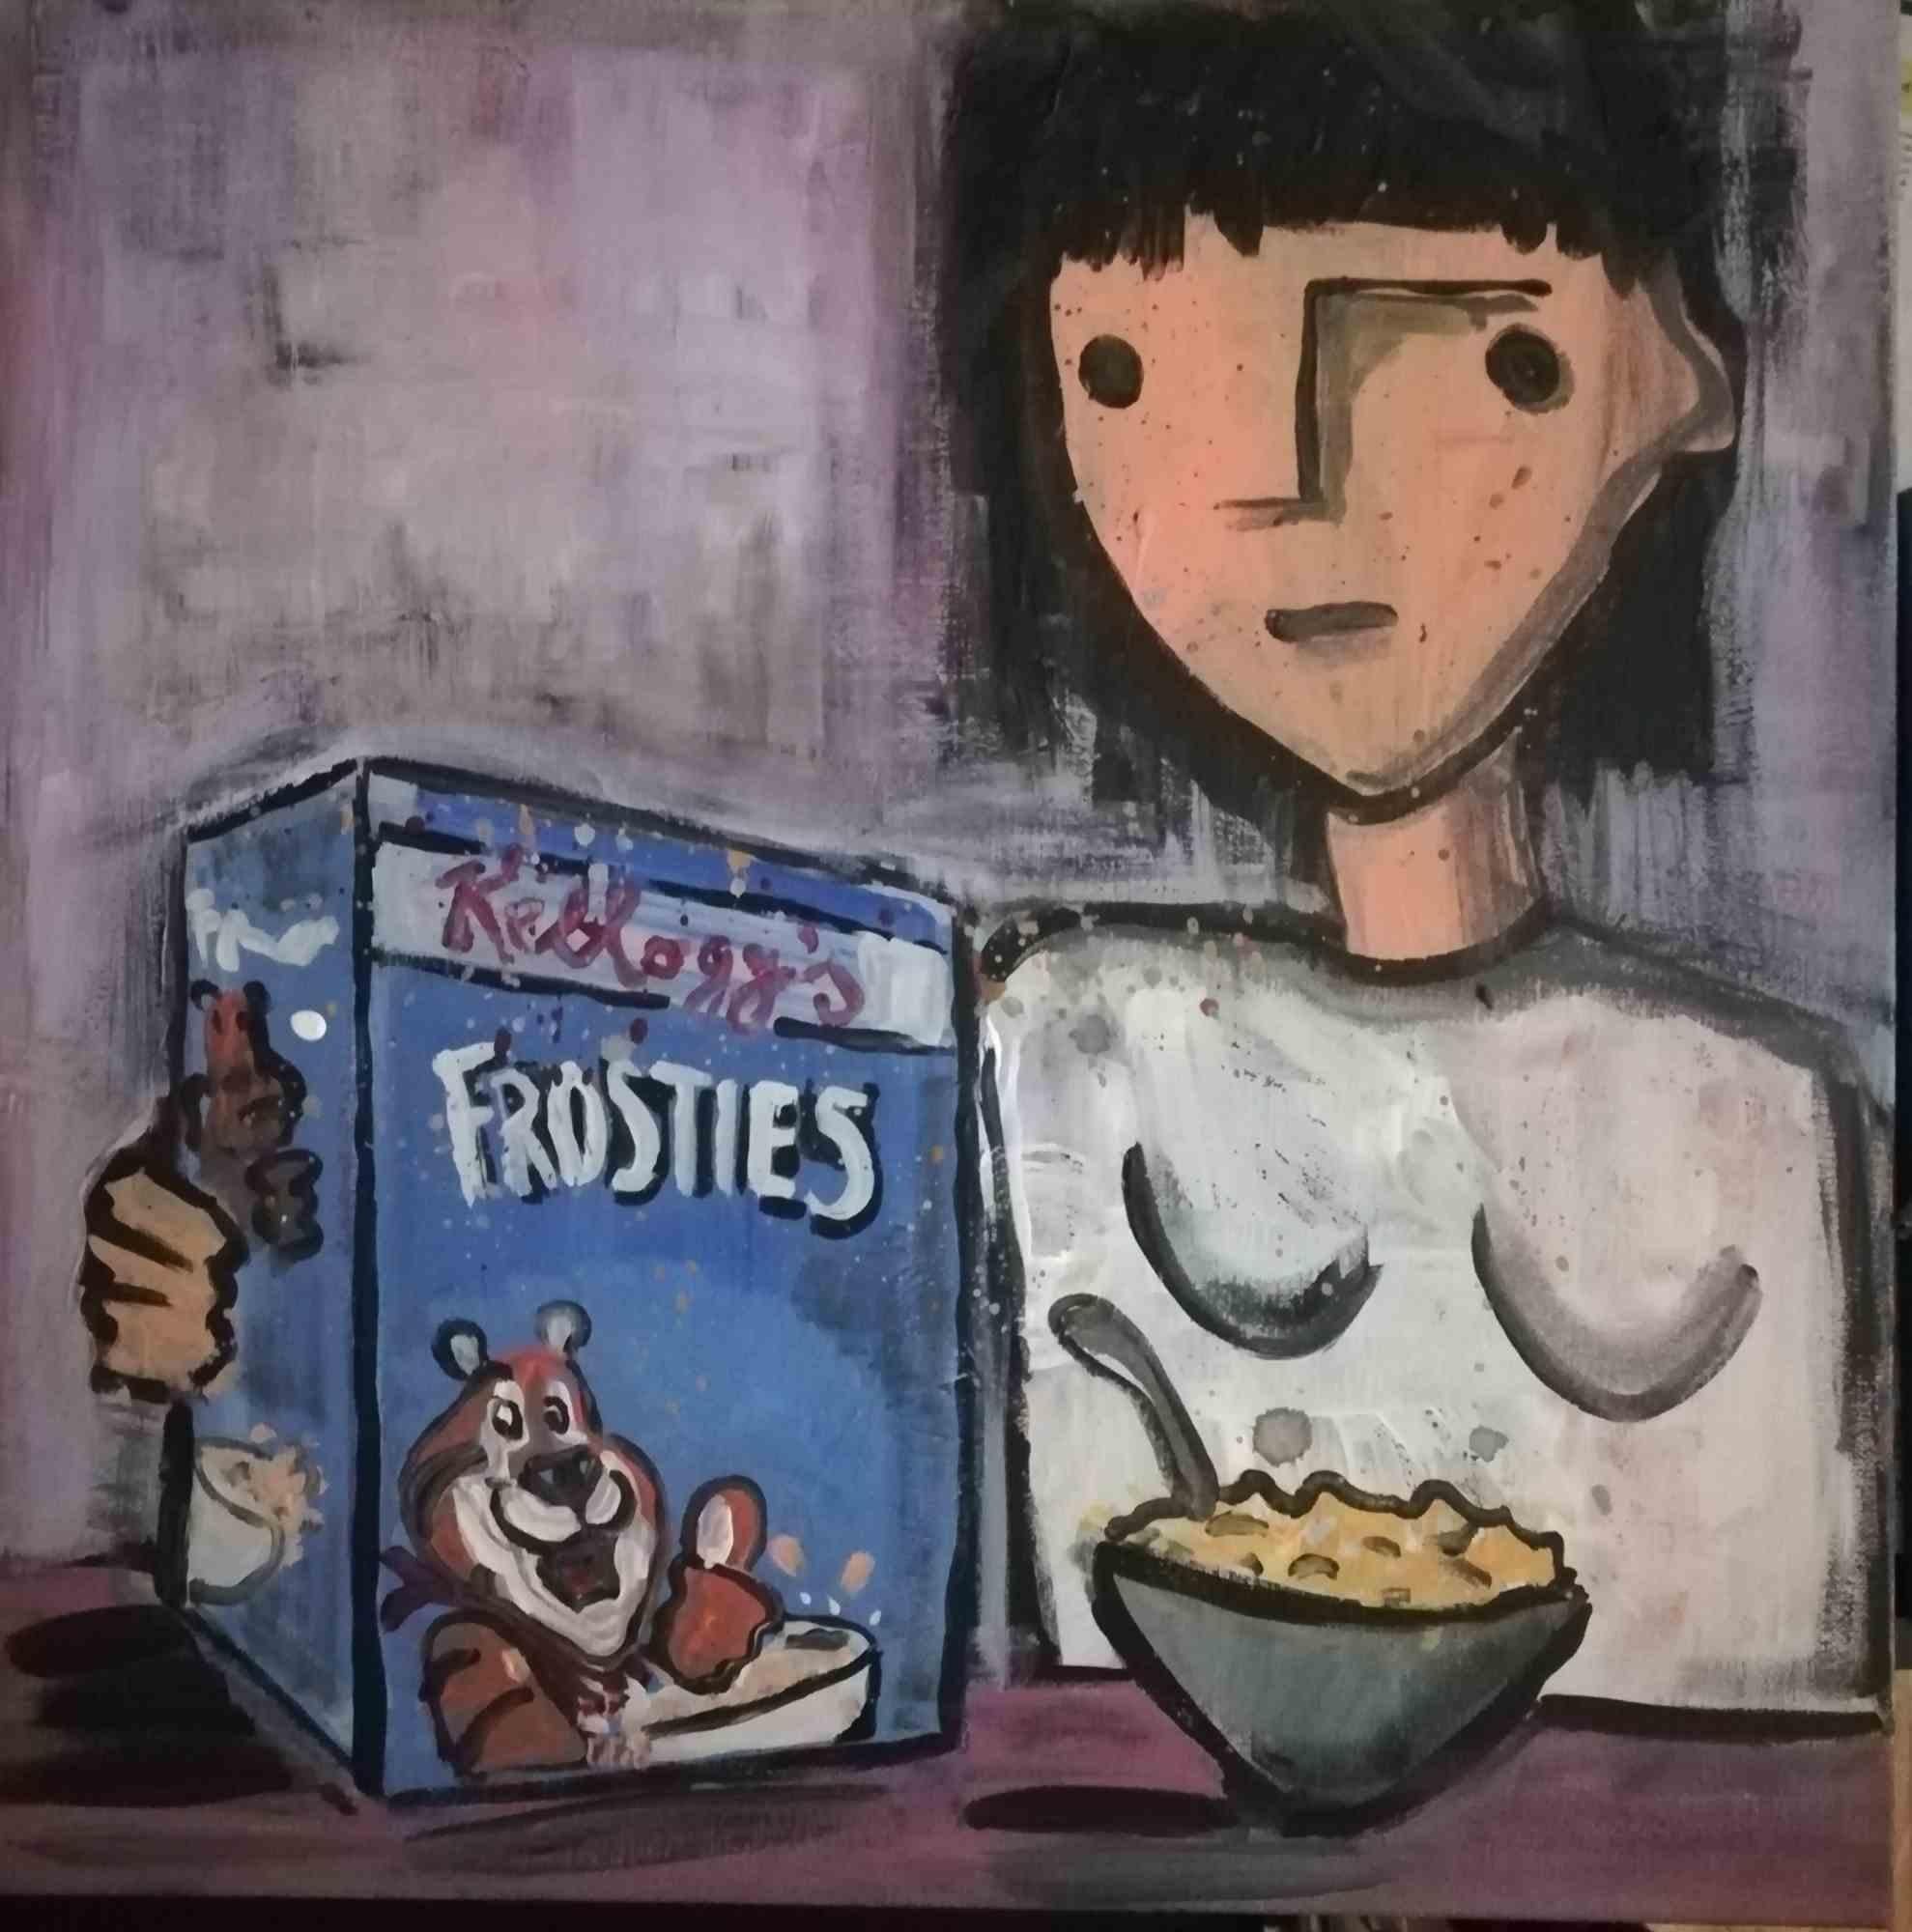 Woman with Cereals - Original Painting by Federico Bramati - 2021